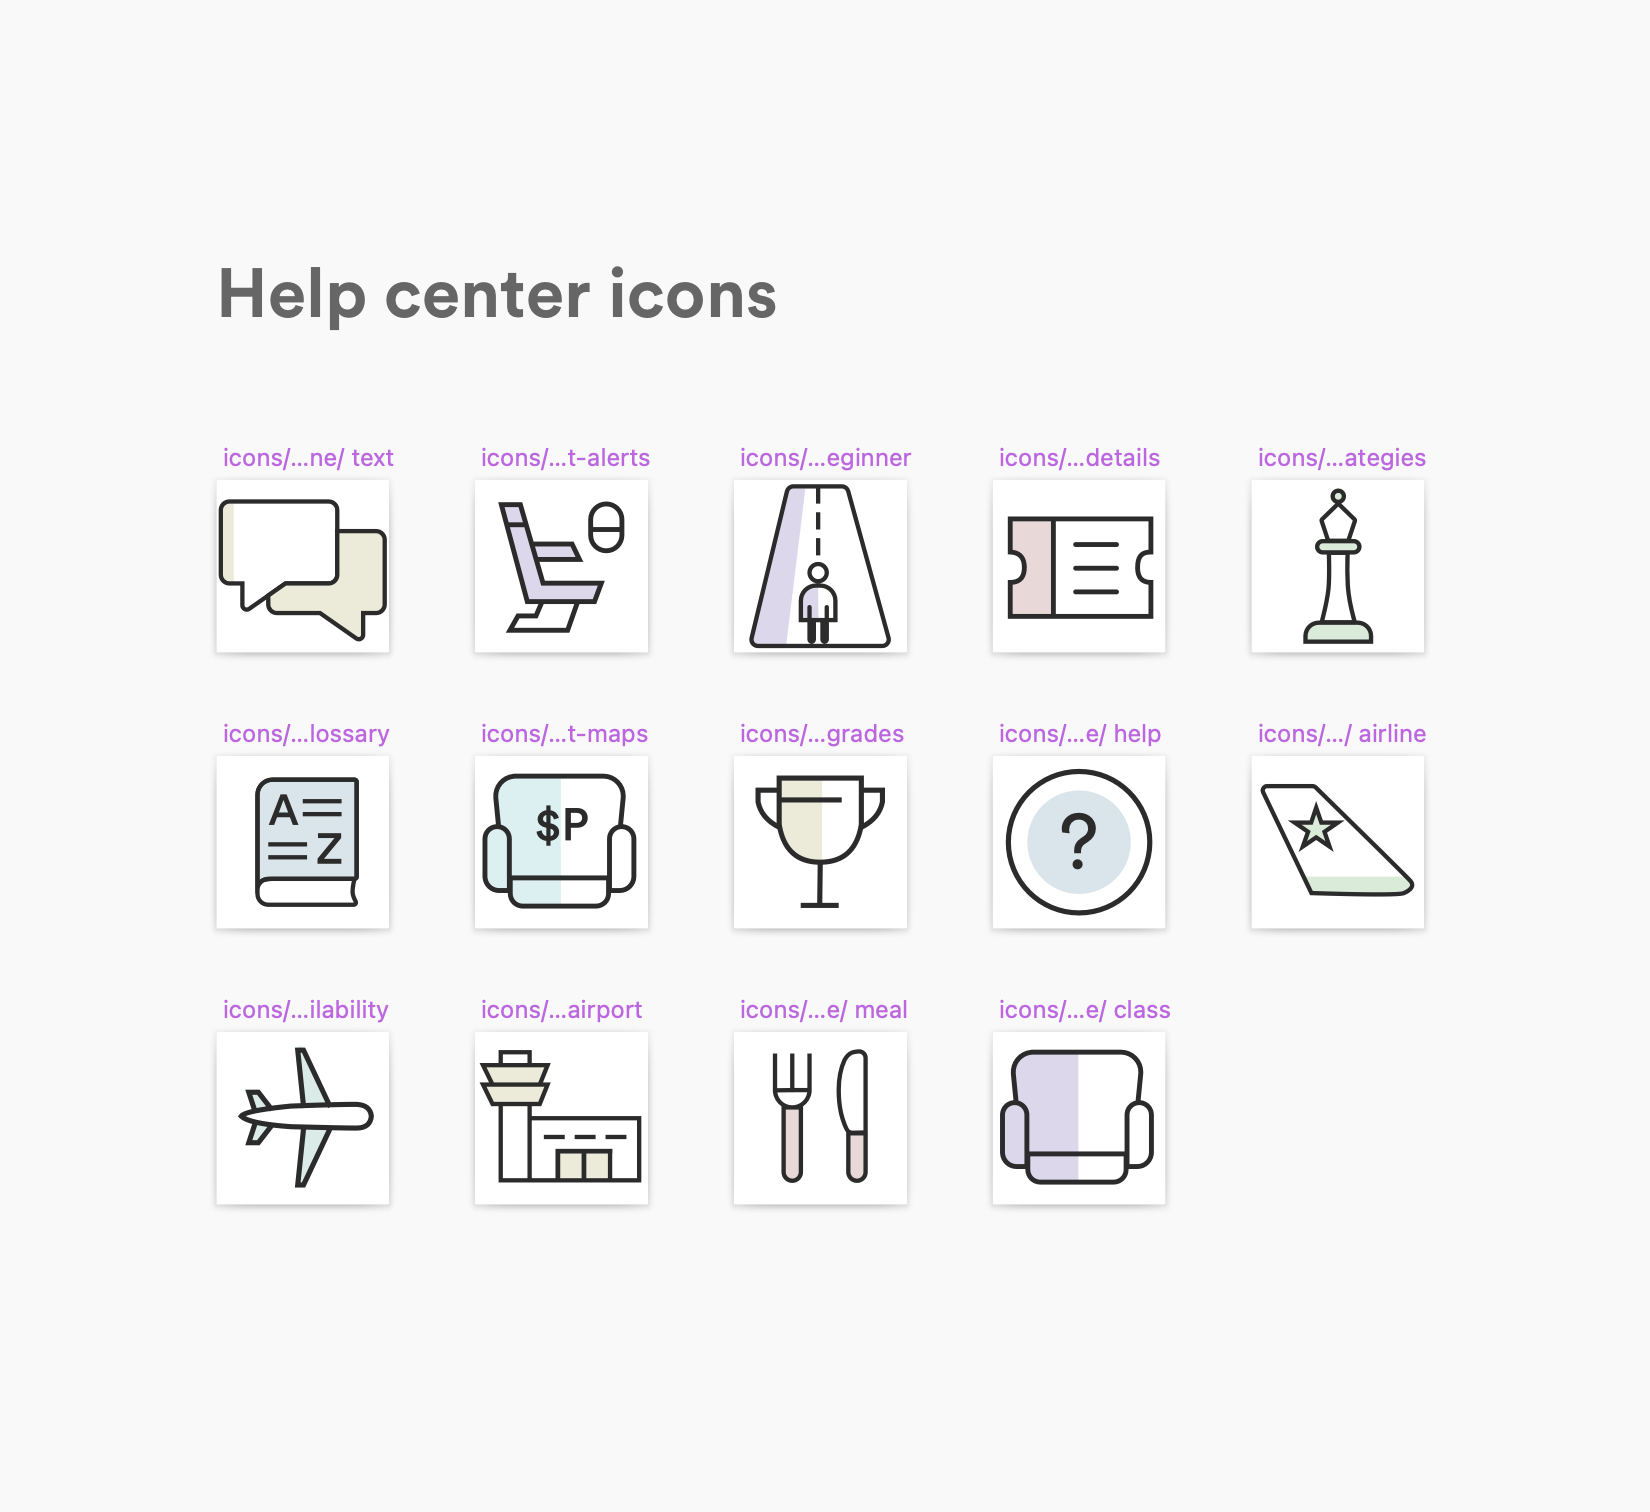 New help center icons